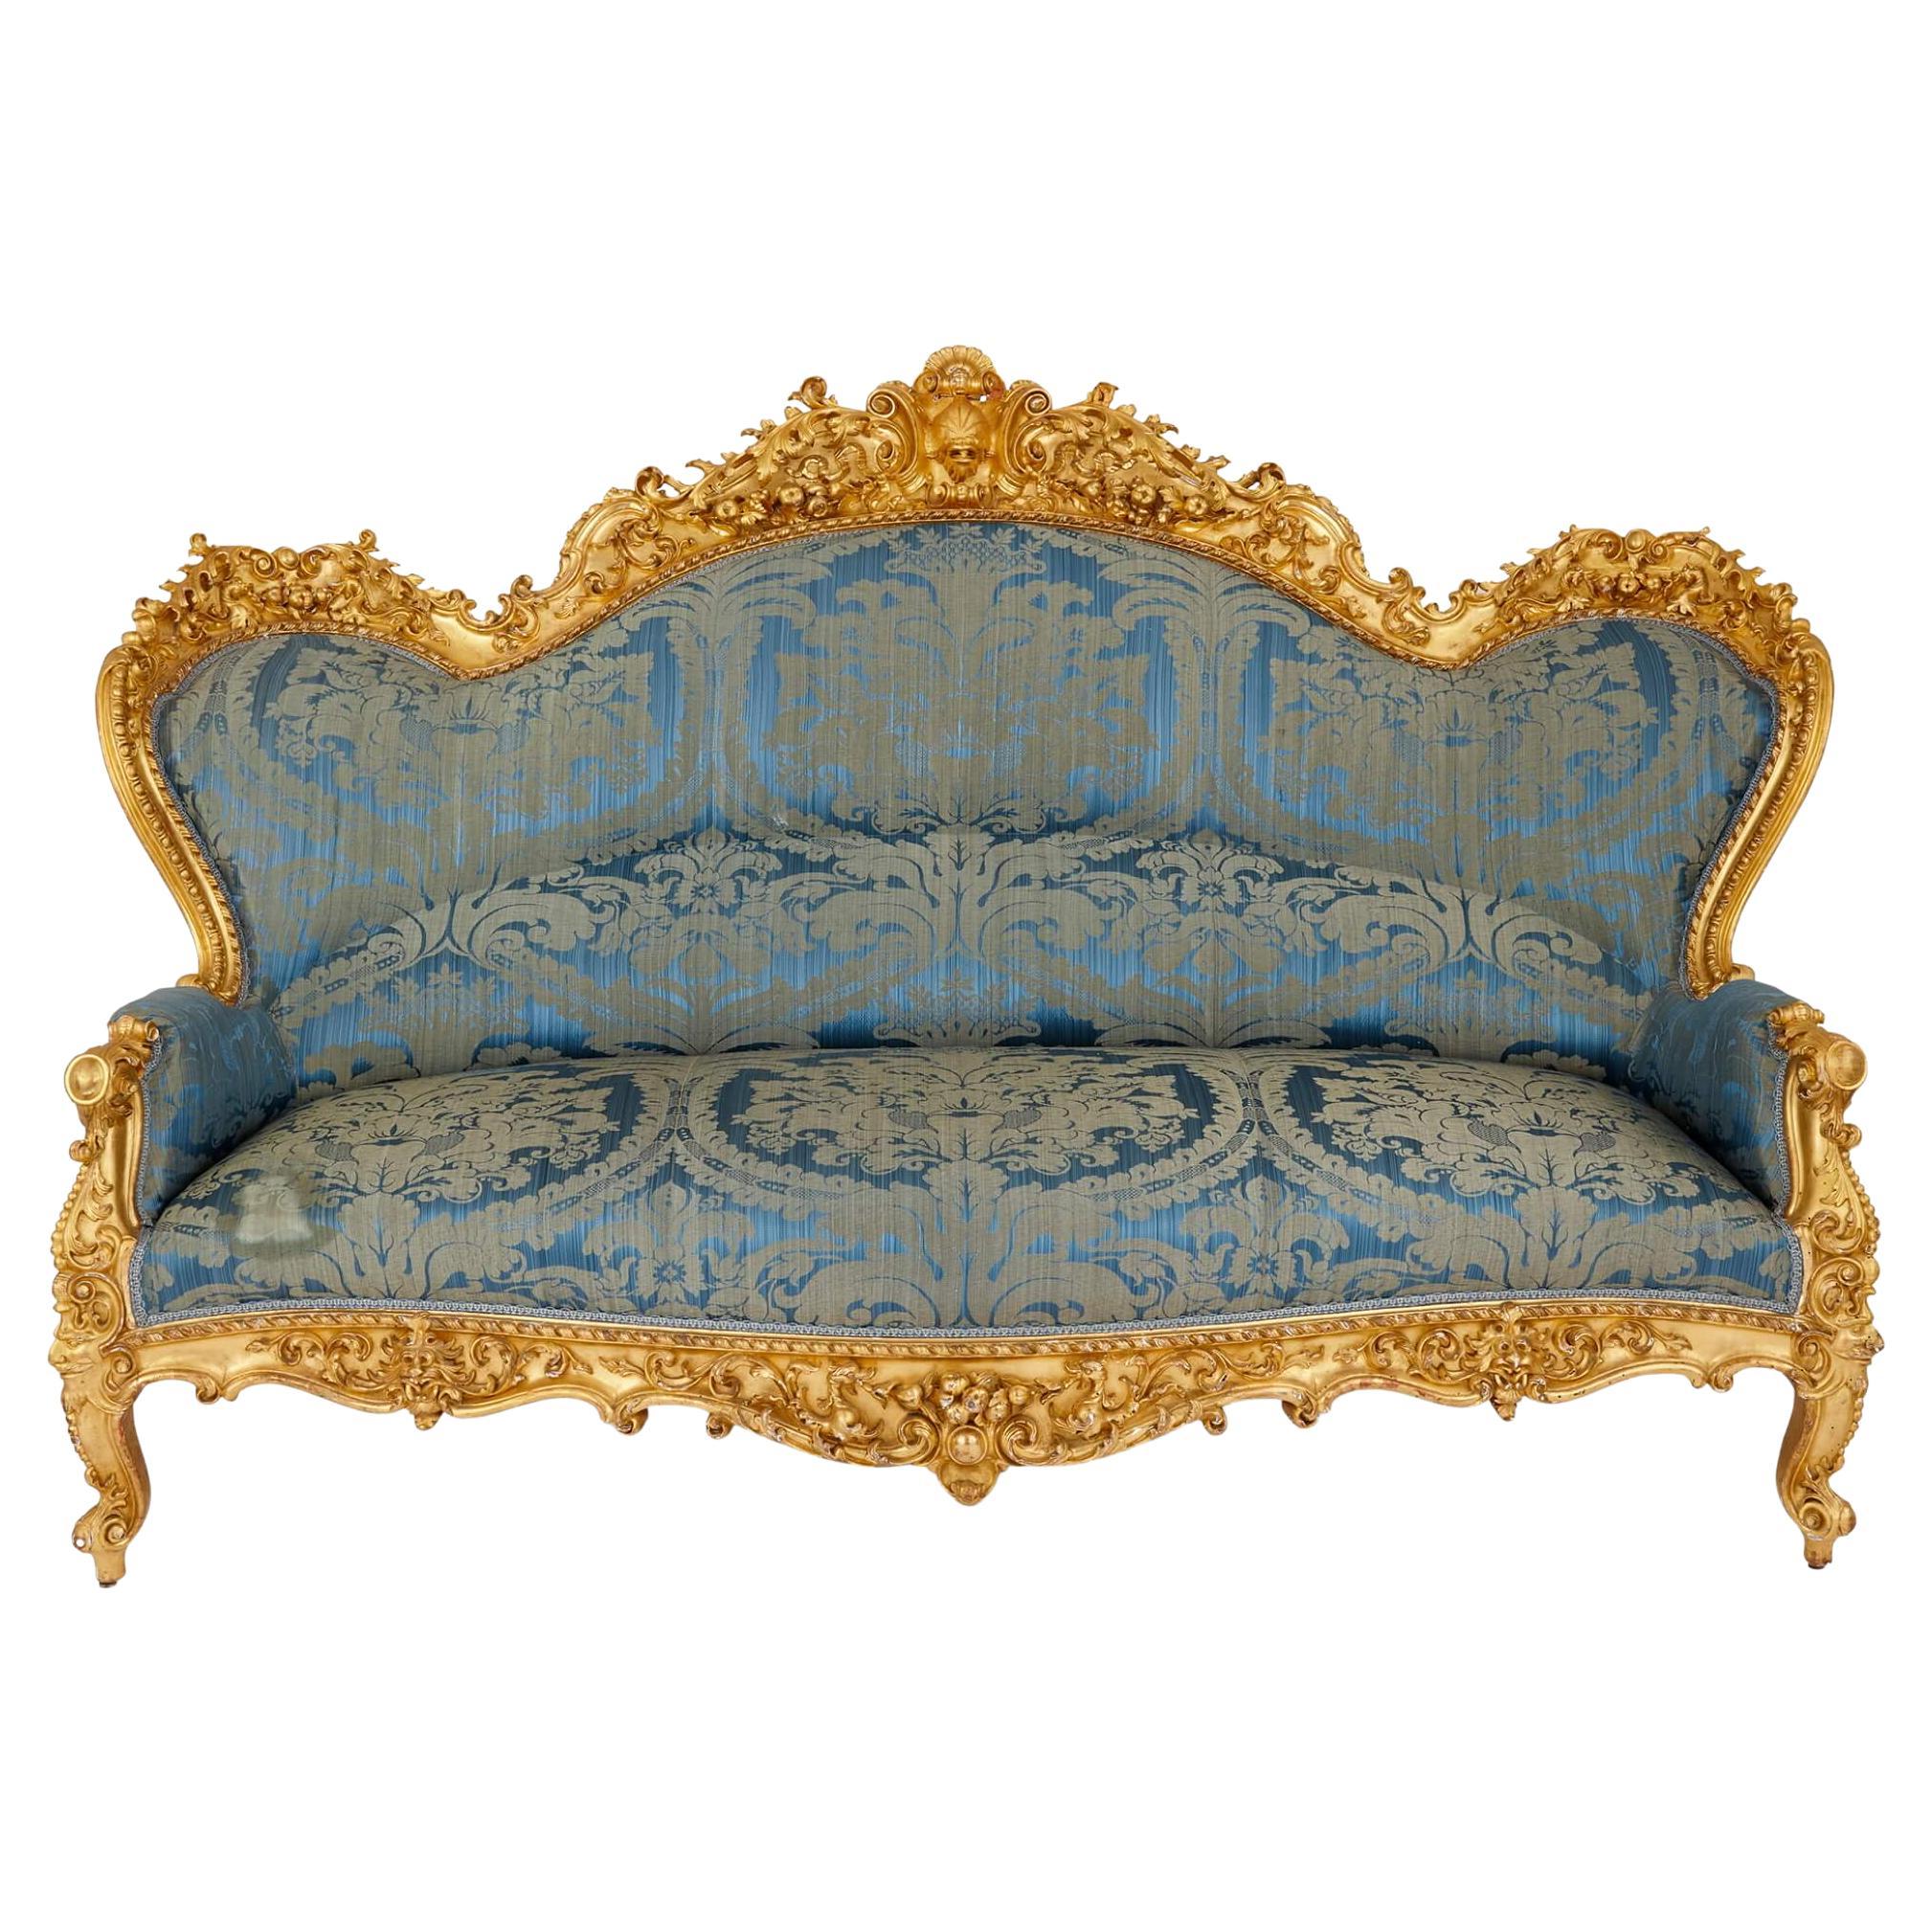 Large Rococo Revival Carved Giltwood Sofa